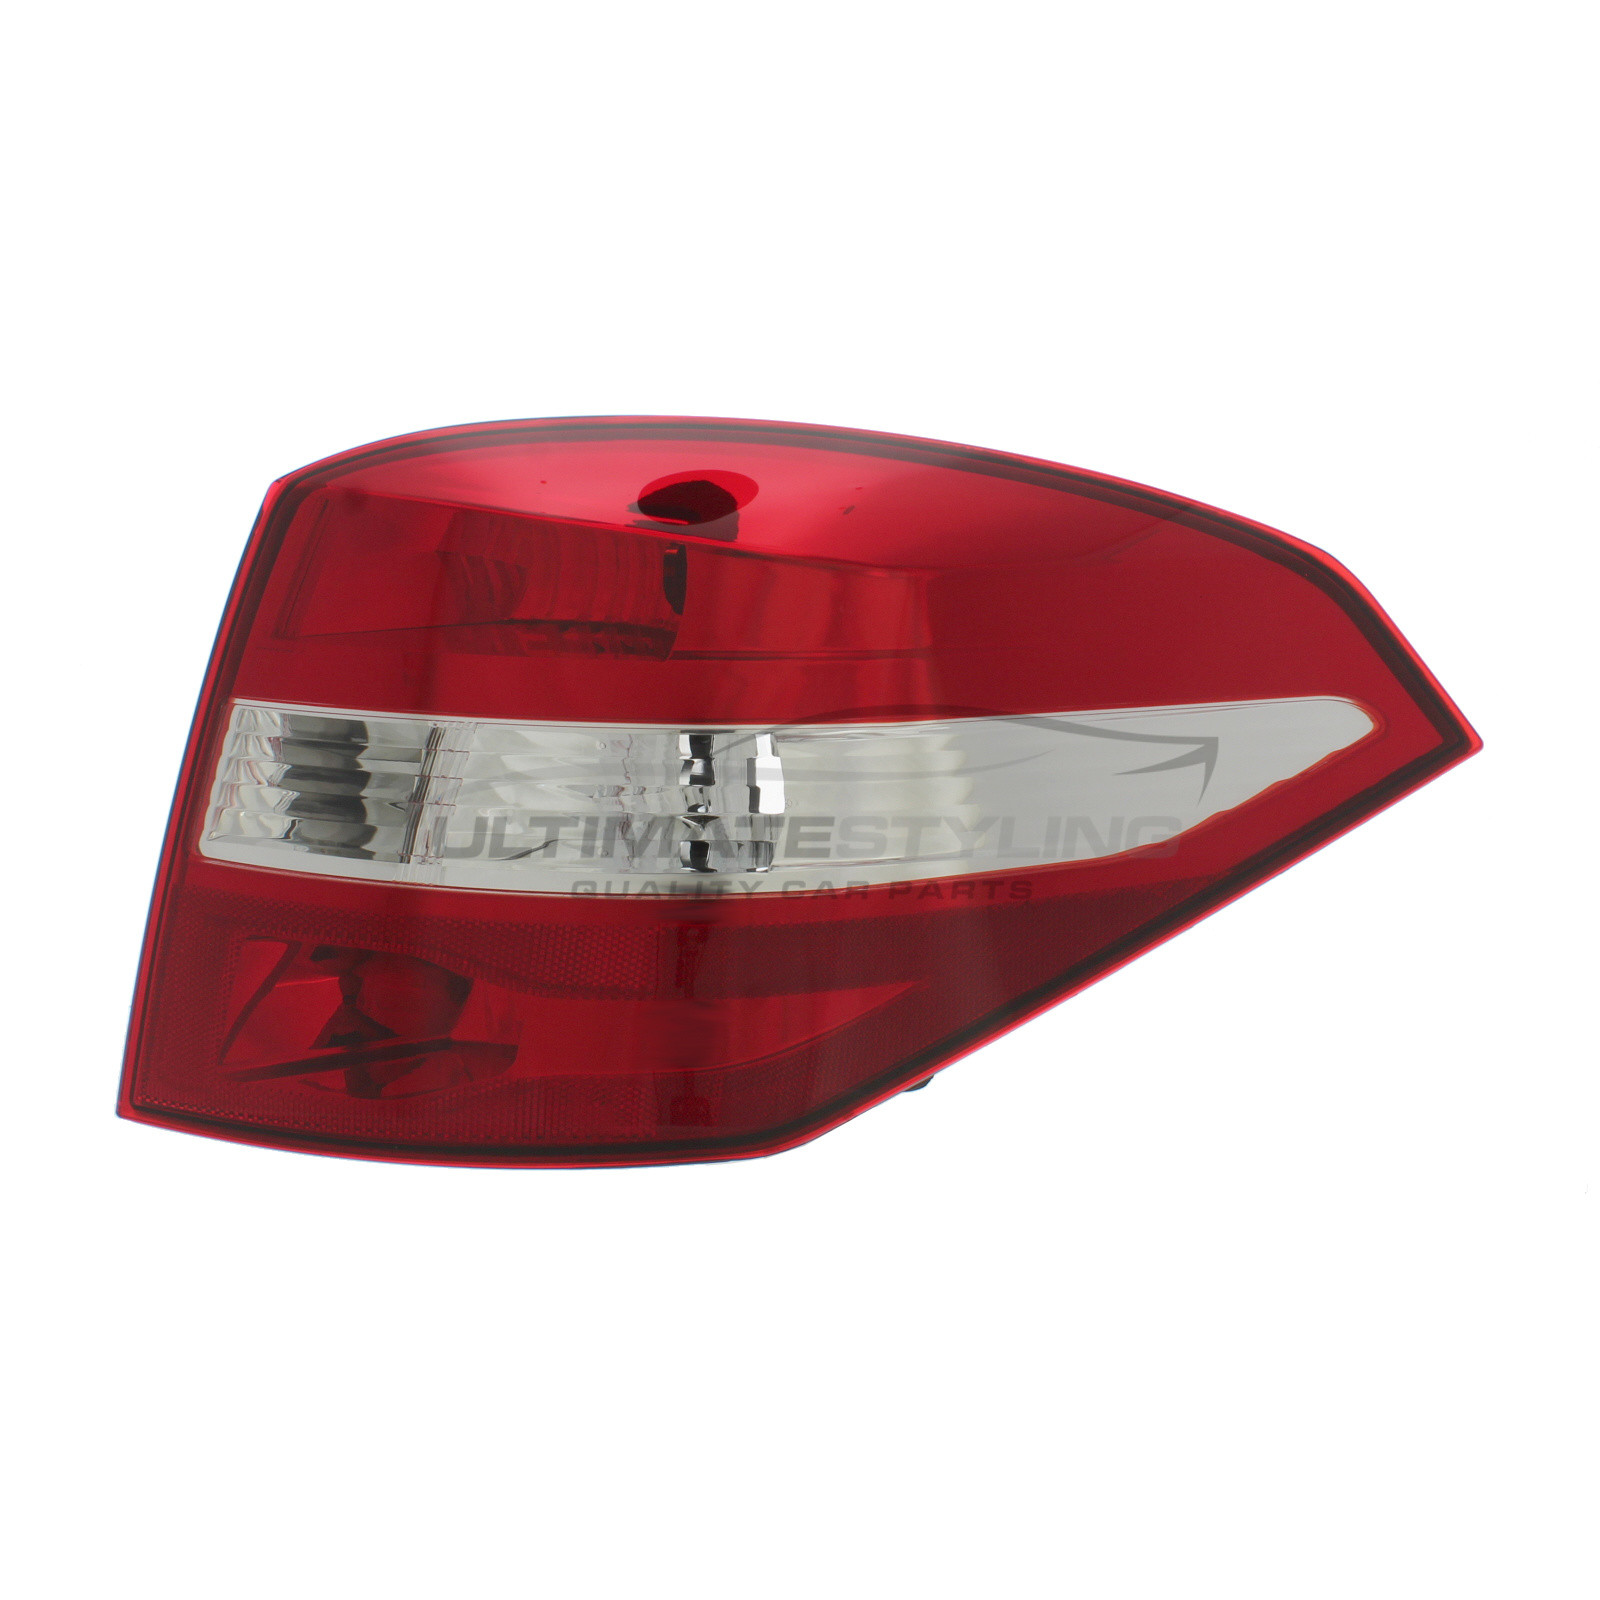 Renault Laguna 2007-2011 Non-LED with Clear Indicator Rear Light / Tail Light Excluding Bulb Holder Drivers Side (RH)